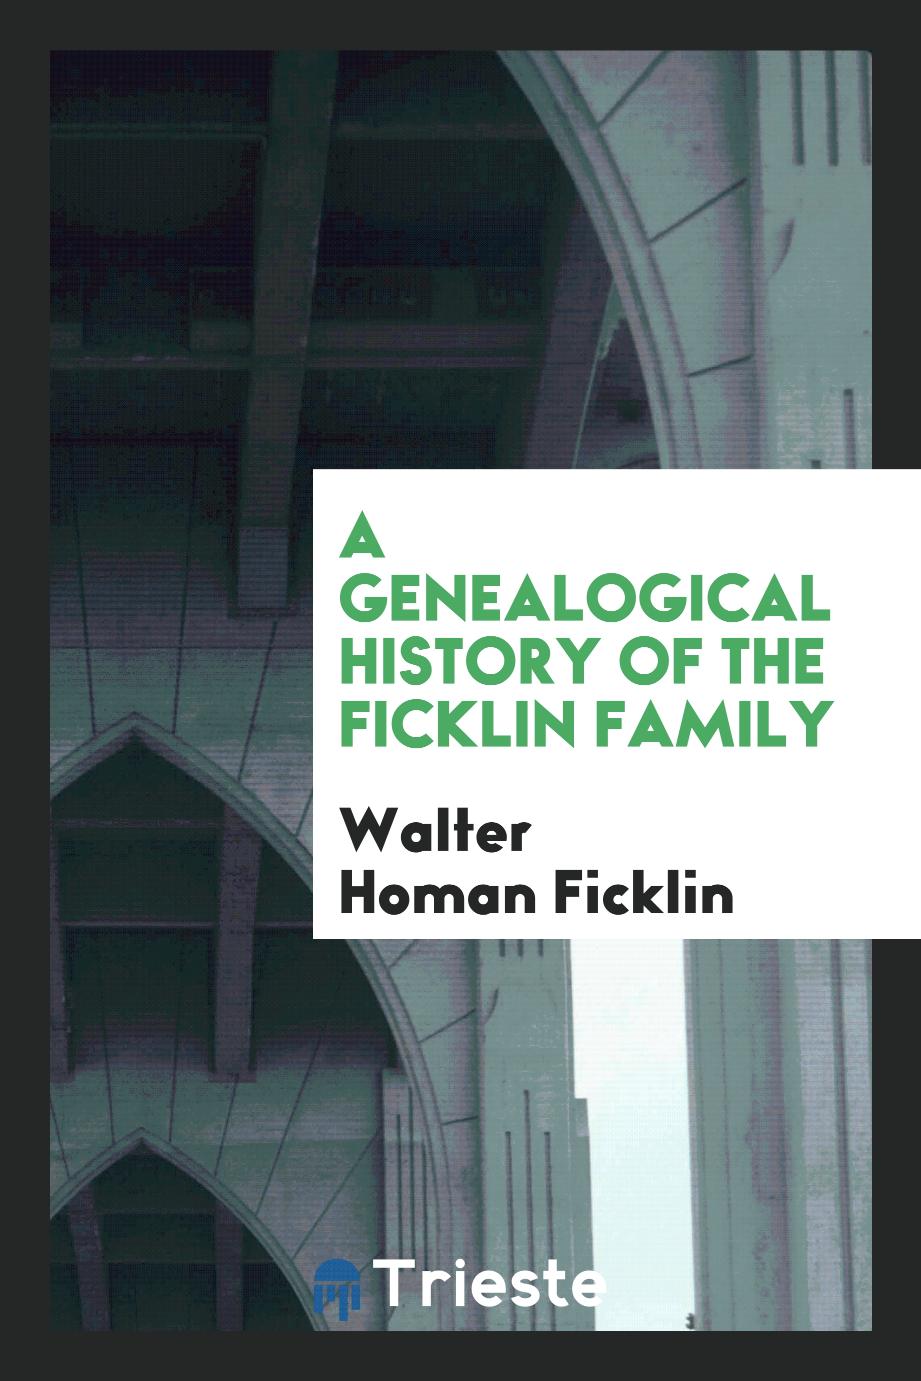 A Genealogical History of the Ficklin Family